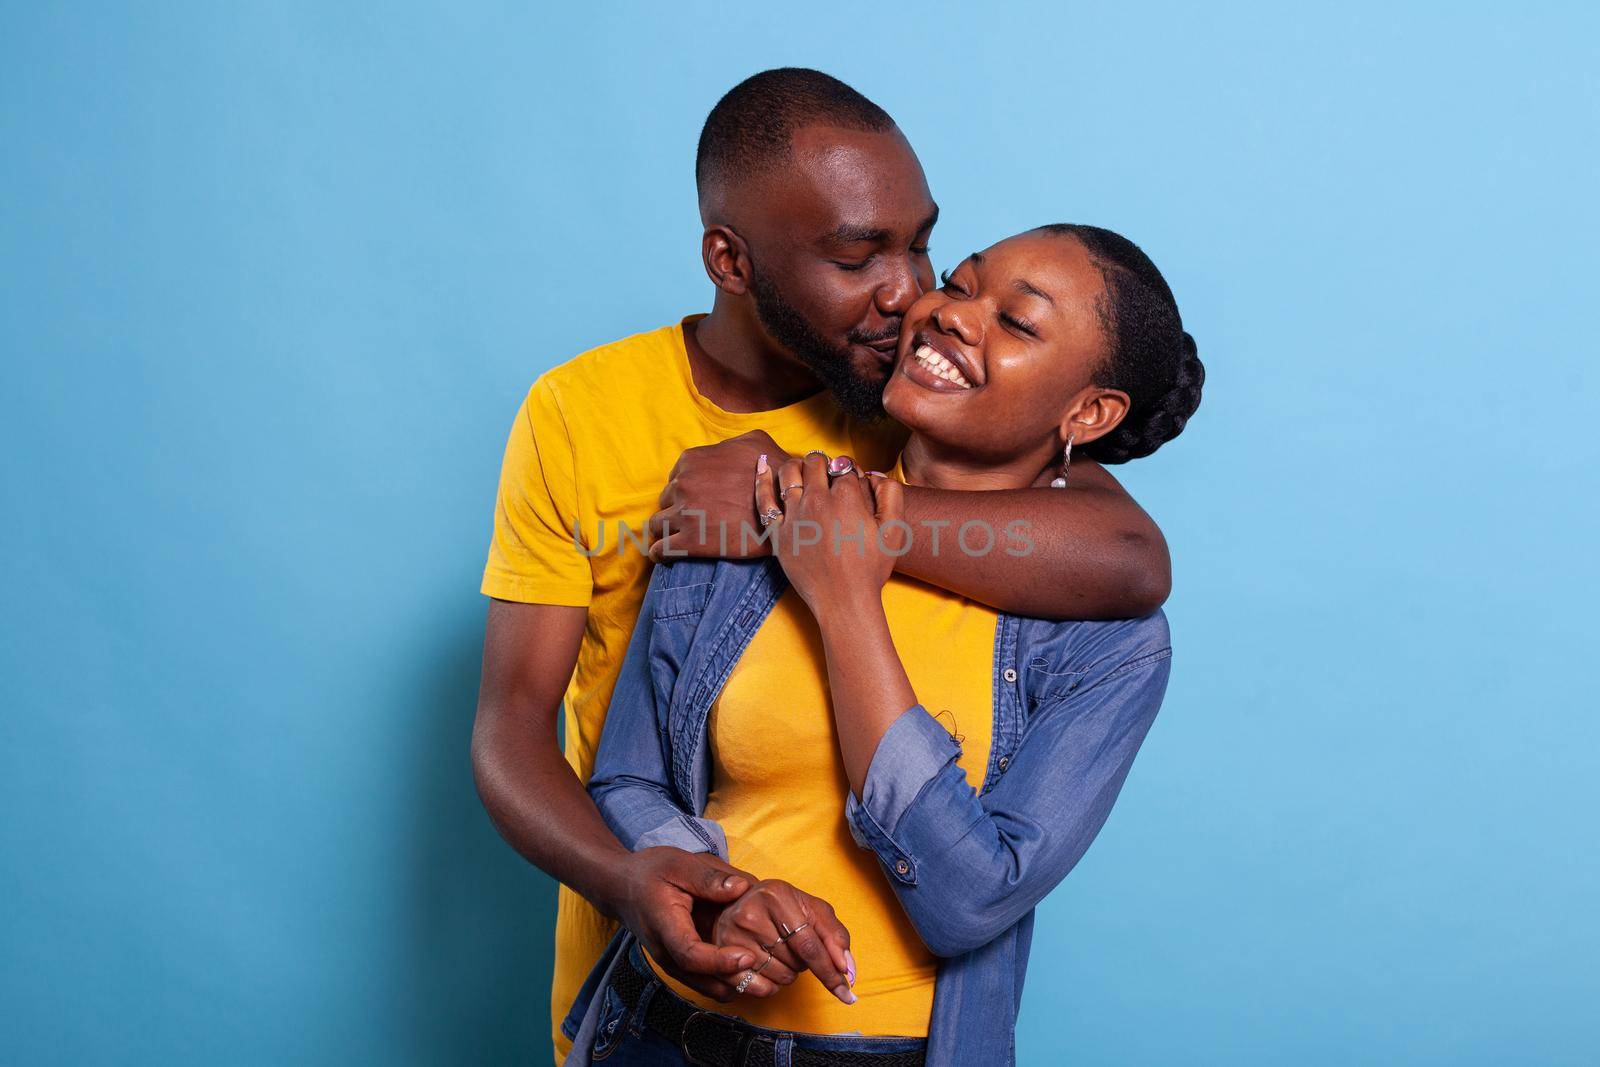 African american couple smiling and hugging each other over blue background. Man and woman in relationship expressing tenderness and affection, sharing embrace together. Cheerful people